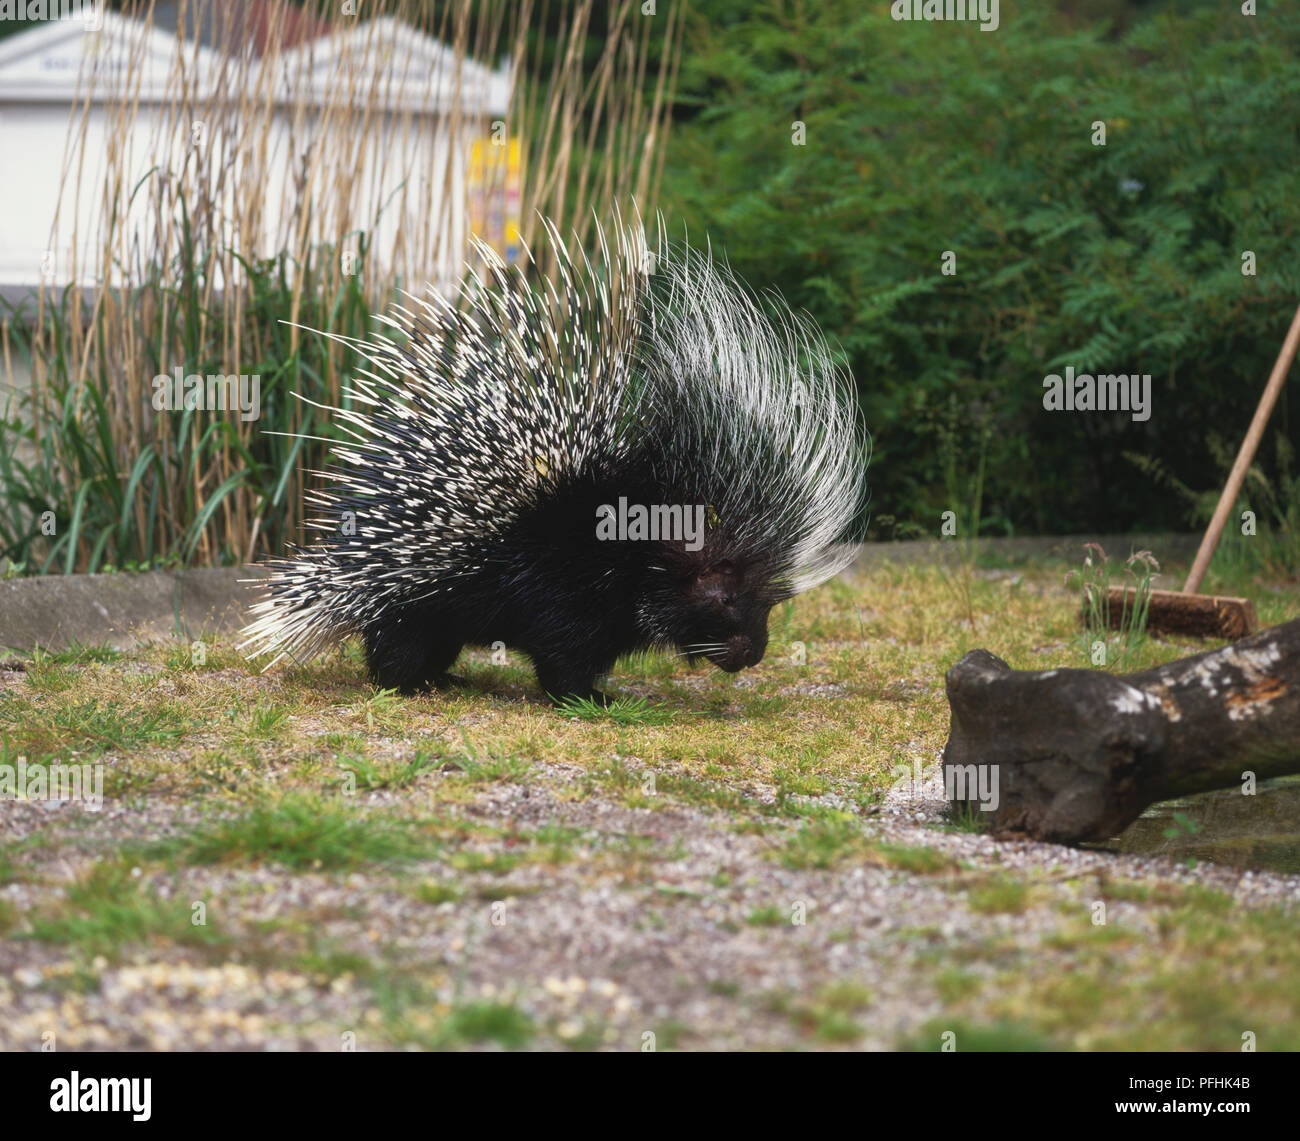 Crested Porcupine, Hystrix cristata, in garden next to broom, side view. Stock Photo